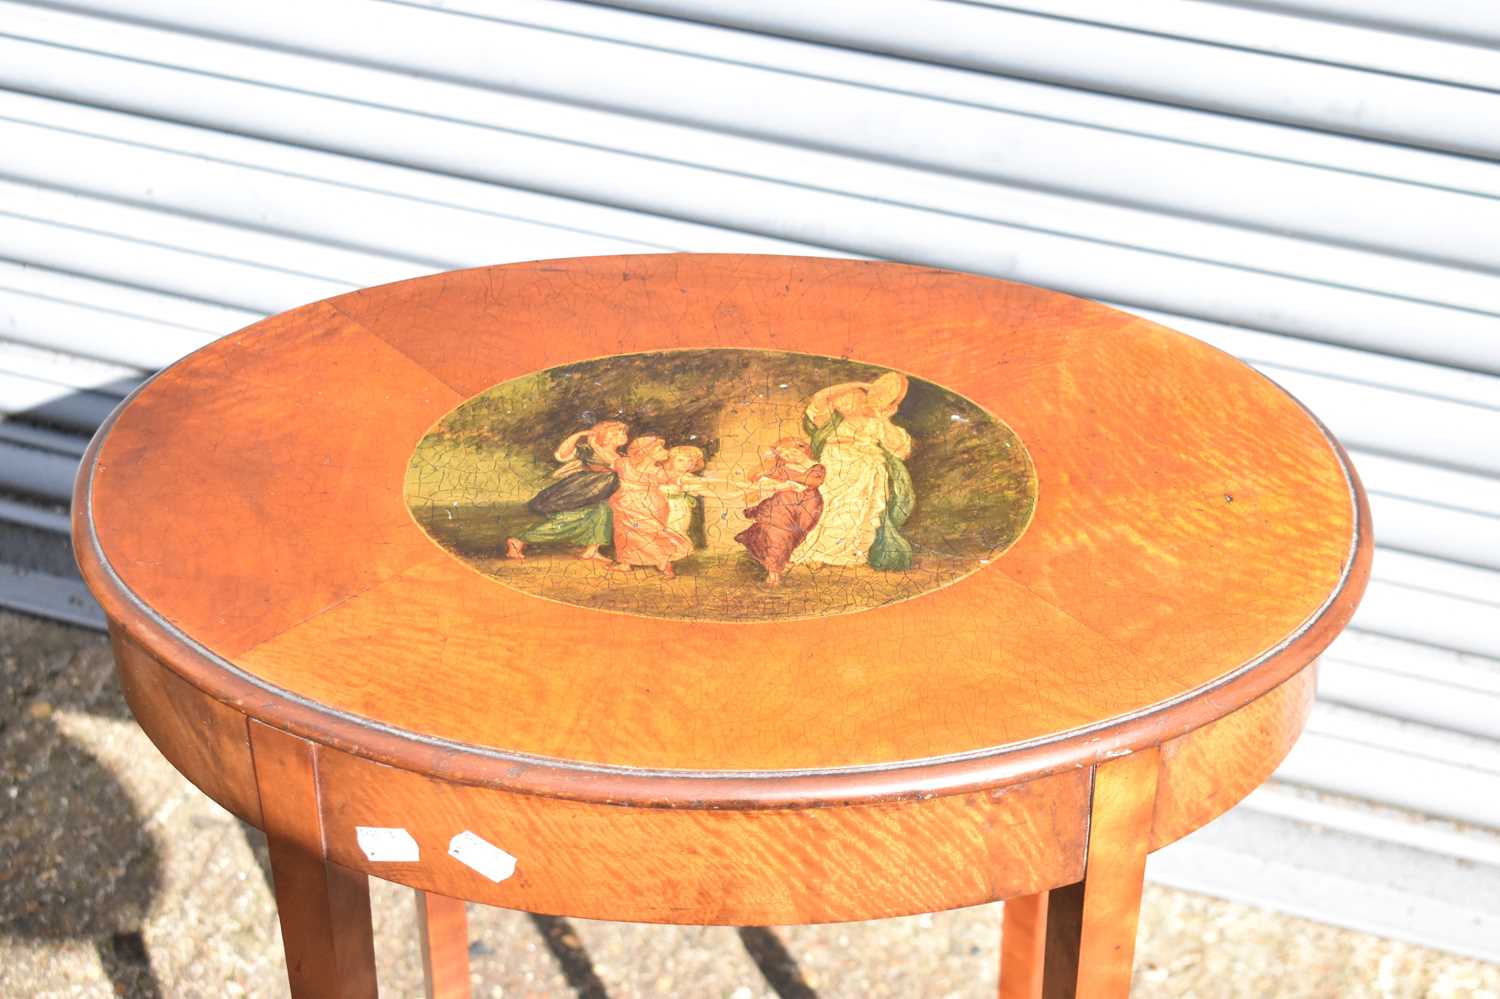 A 19th century sewing table with painted top (possibly bird's eye maple), 73 cms high, 53 cms wide - Image 2 of 2